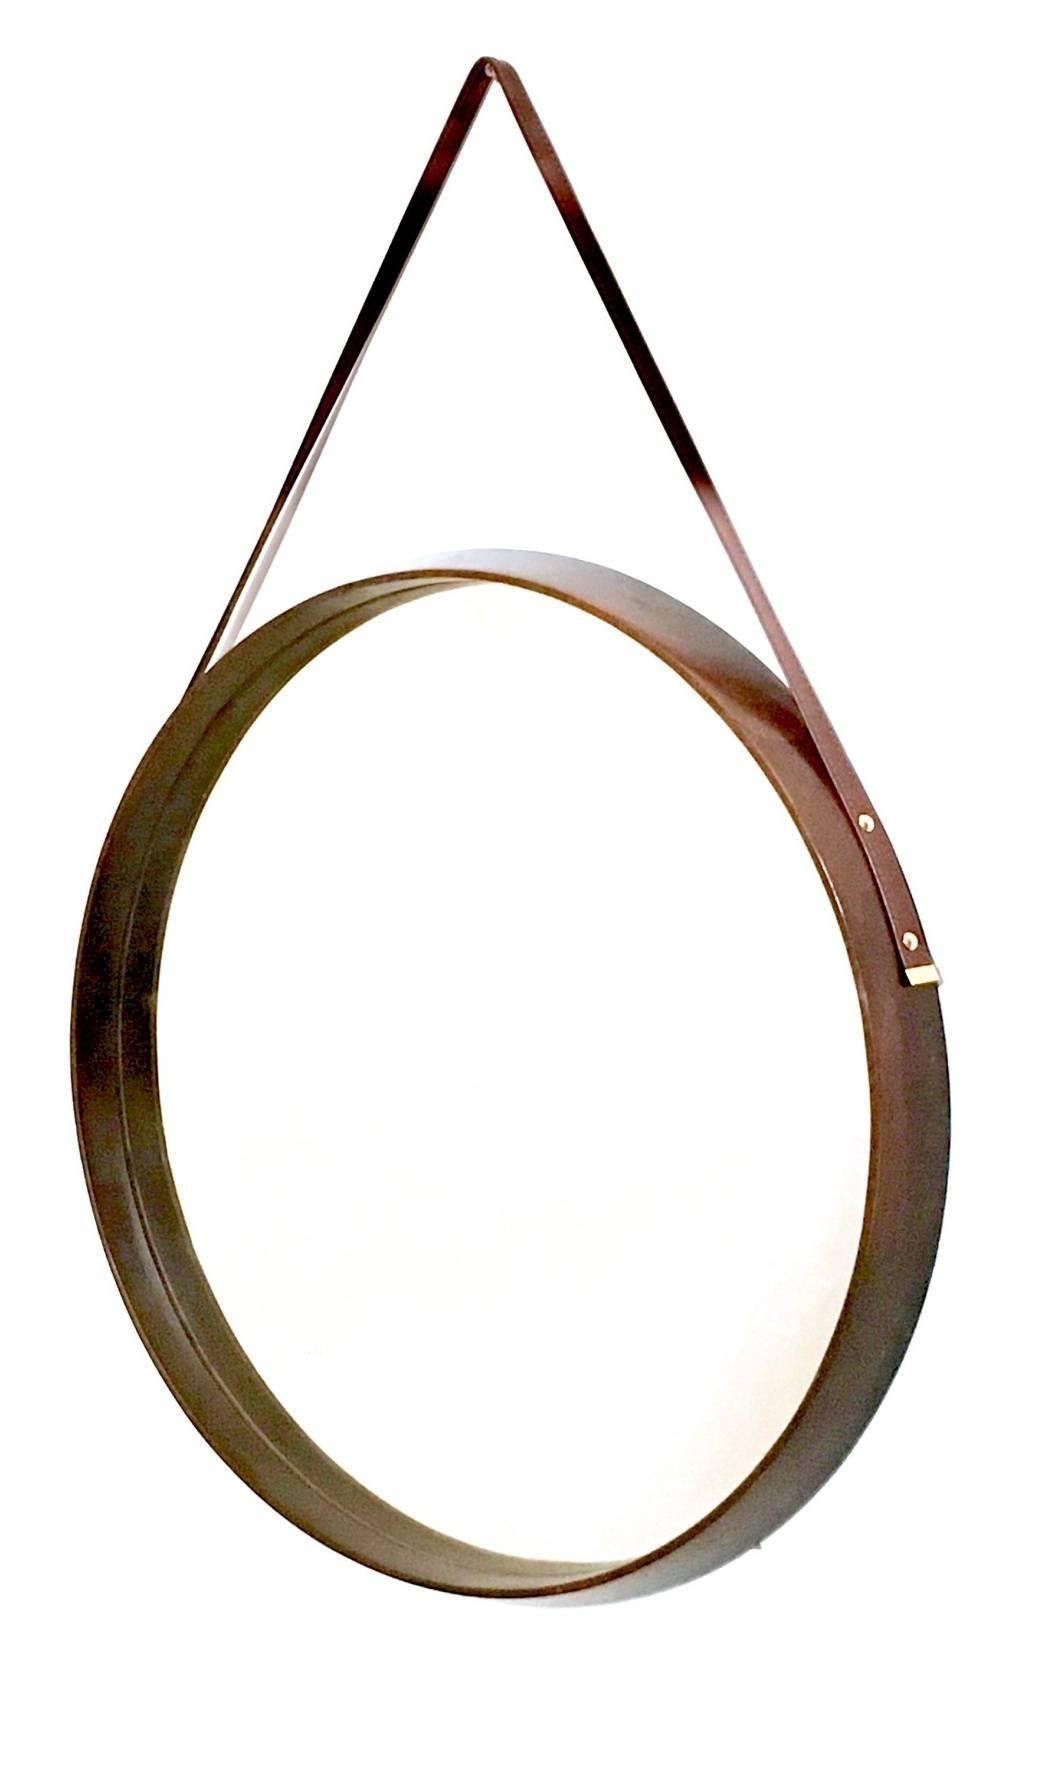 Made in brass, solid mahogany, mirror and leather.
The structure is in wood.
In perfect condition, as we replaced the leather with new one.
 
Measures: 
Diameter 51 cm
Depth 4 cm